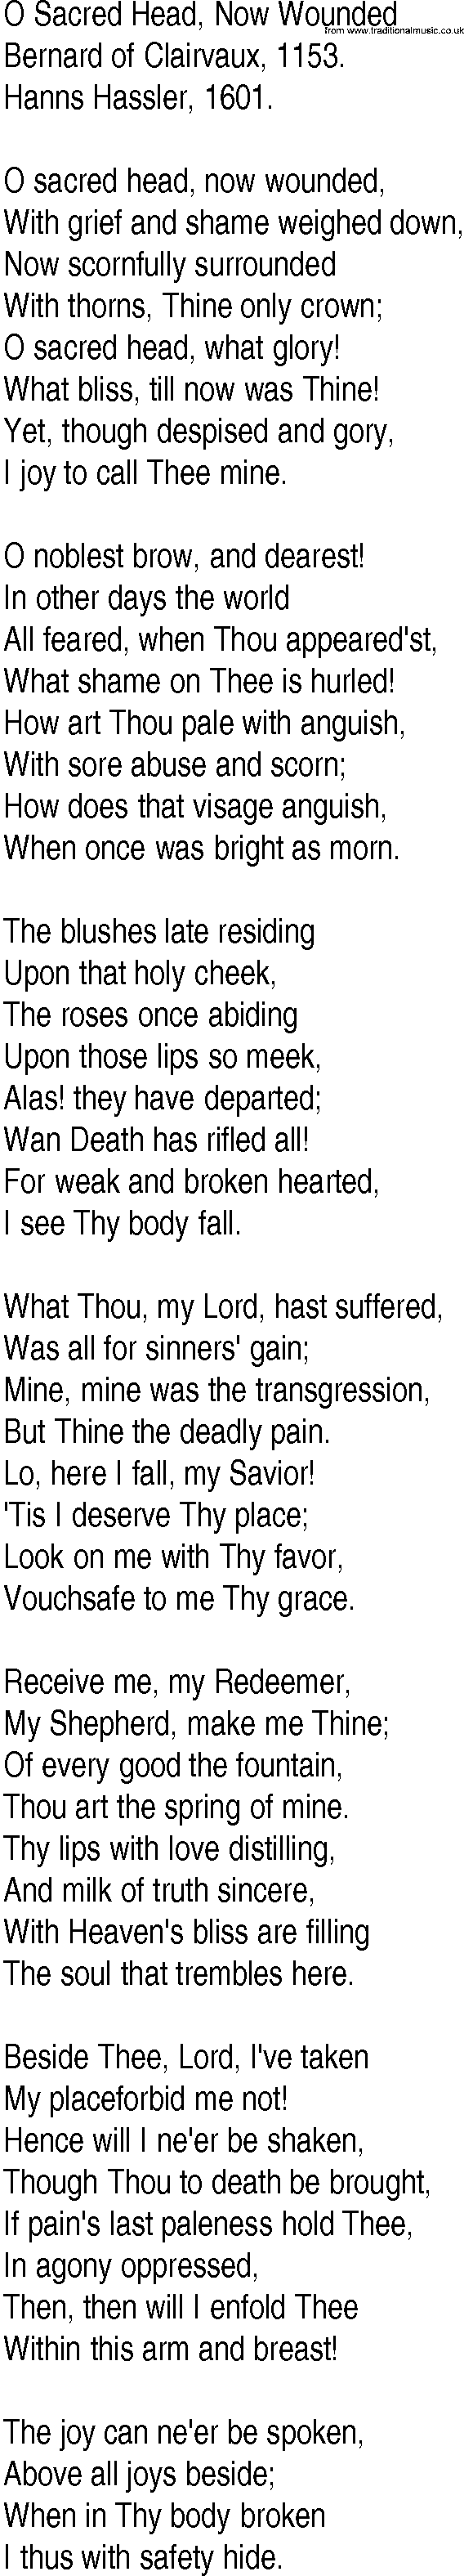 Hymn and Gospel Song: O Sacred Head, Now Wounded by Bernard of Clairvaux lyrics